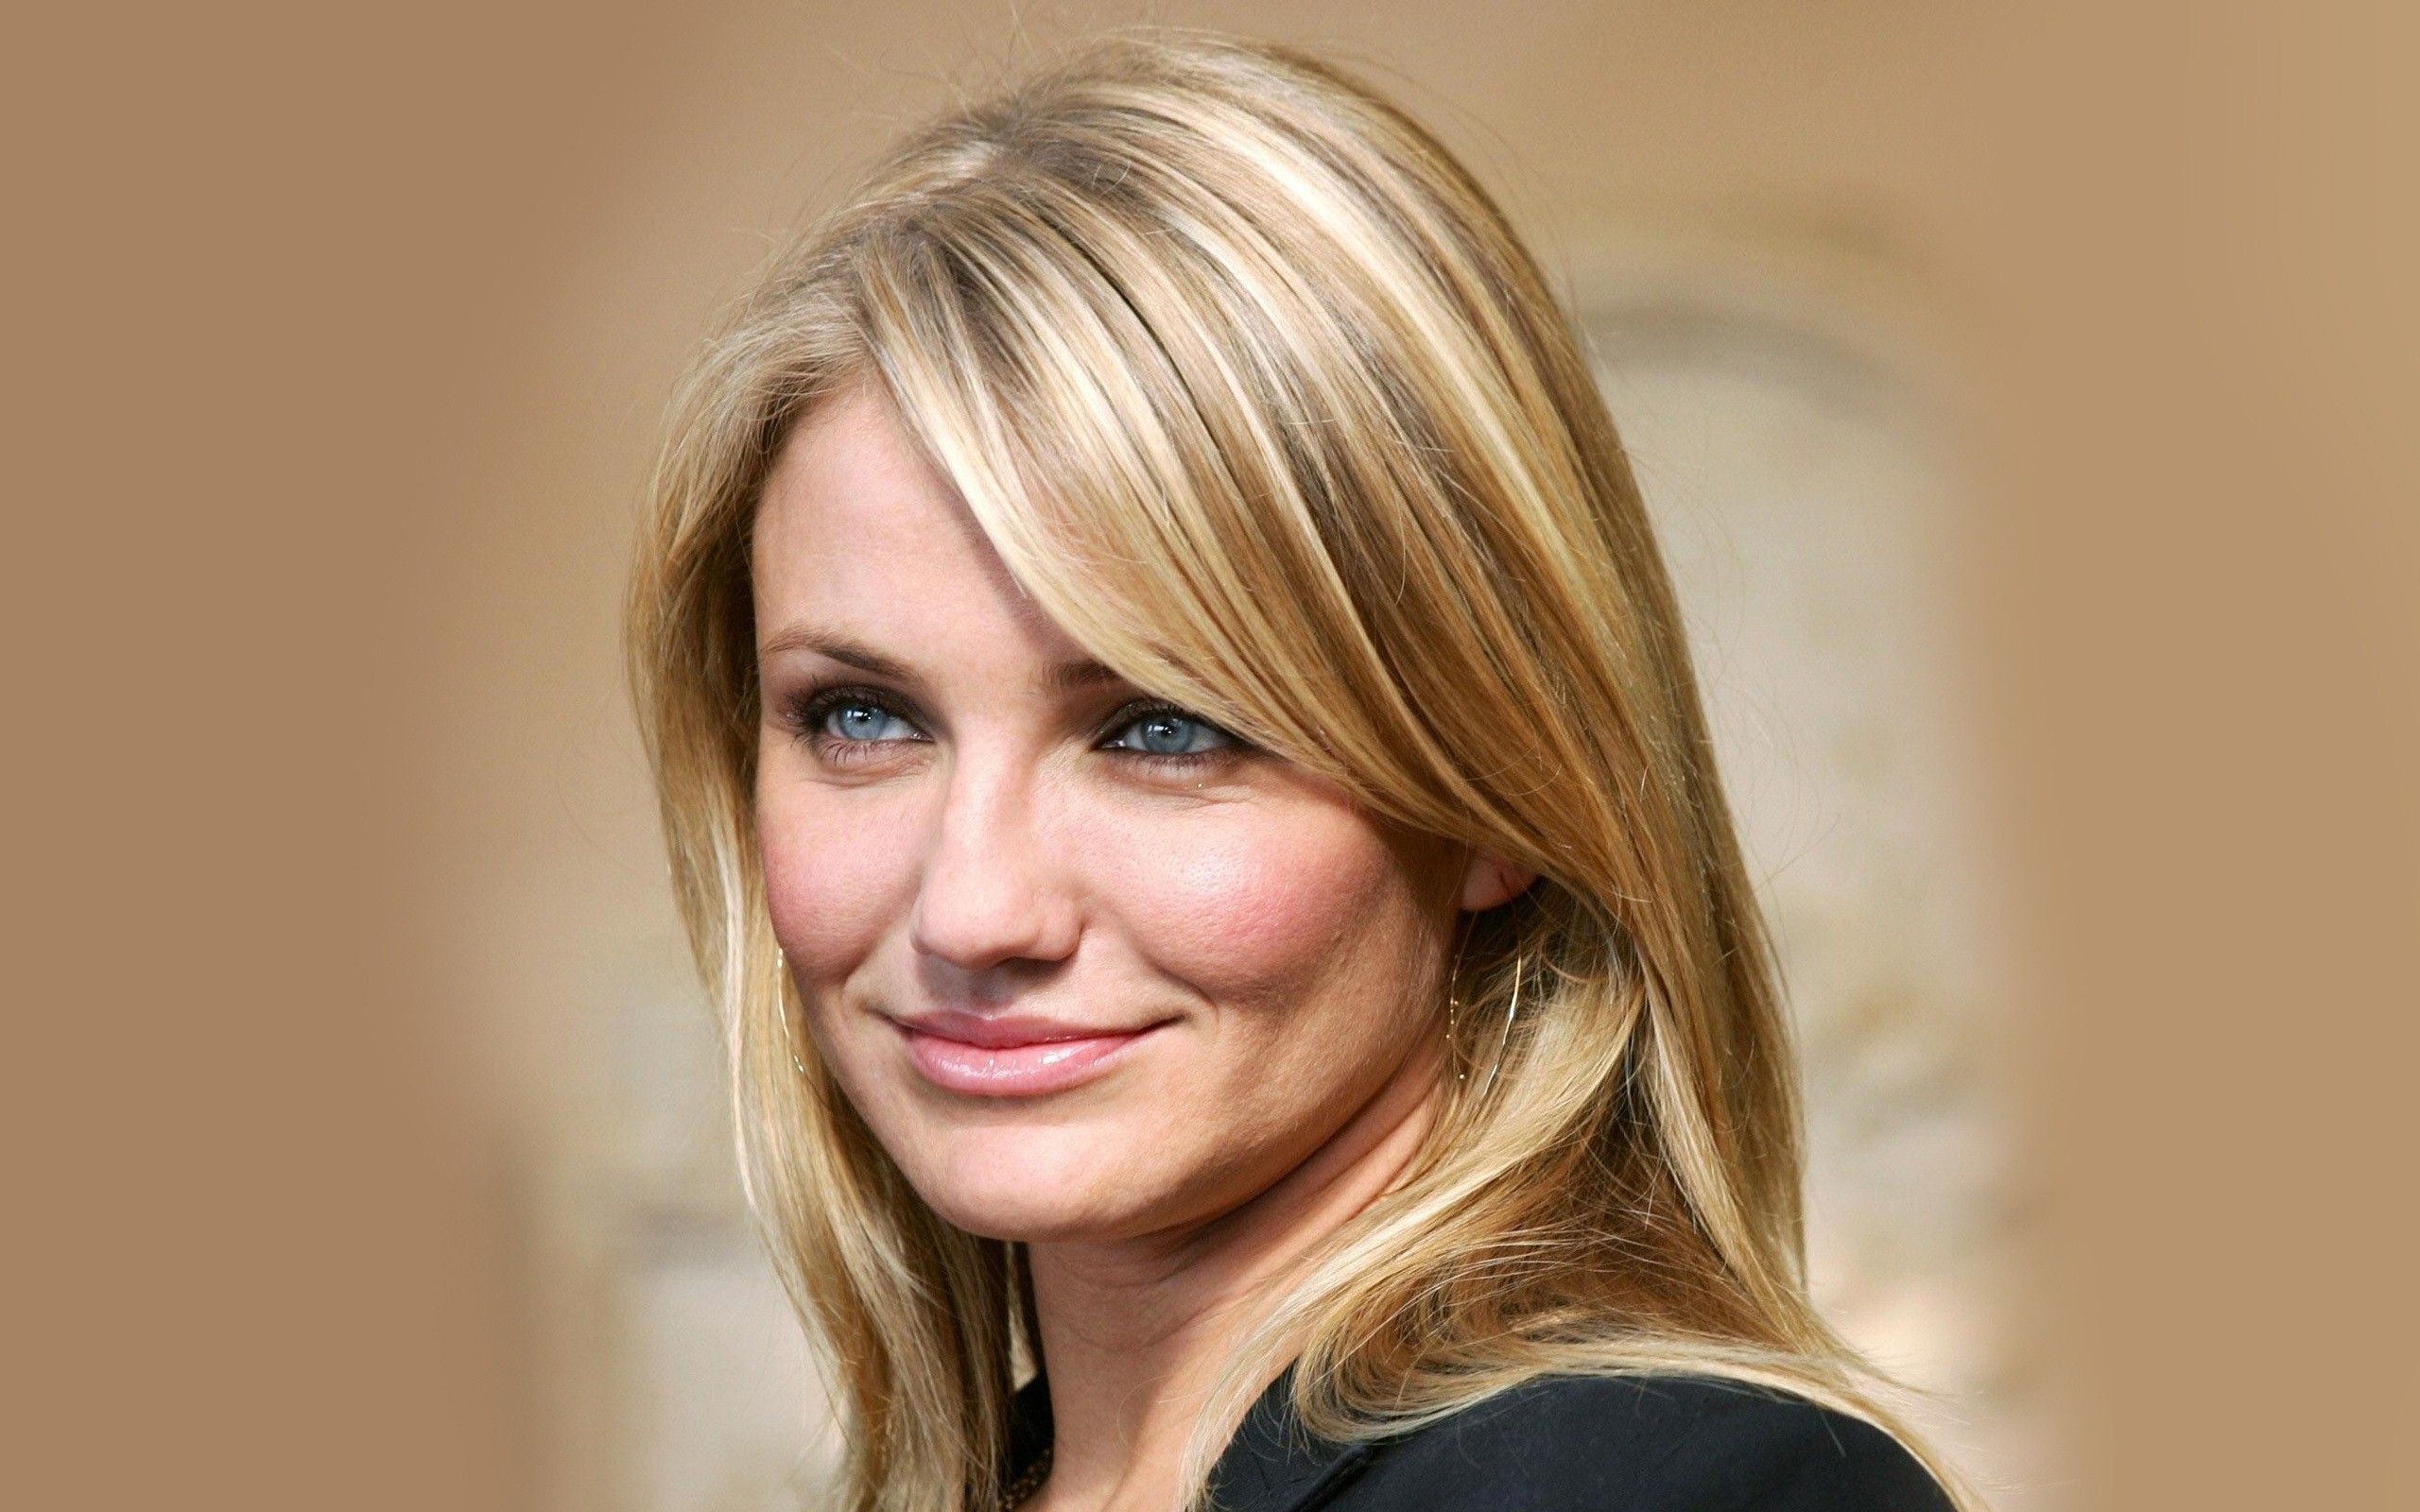 2560x1600, Cute Hd Wallpapers Of Cameron Diaz Hollywood - Cameron Diaz American Actress - HD Wallpaper 